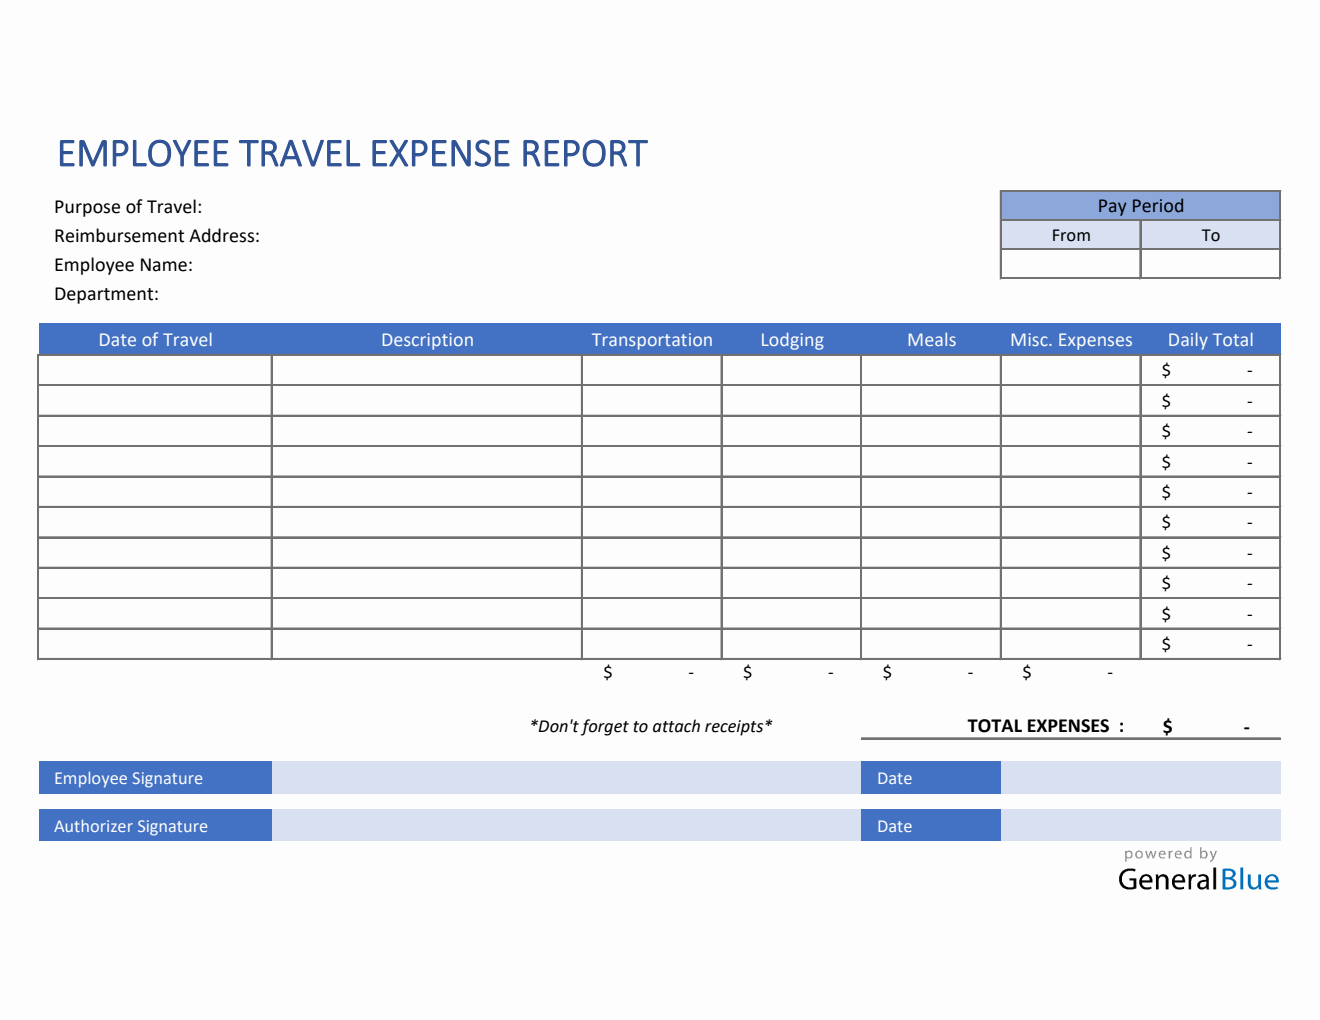 Employee Travel Expense Report Template in Excel